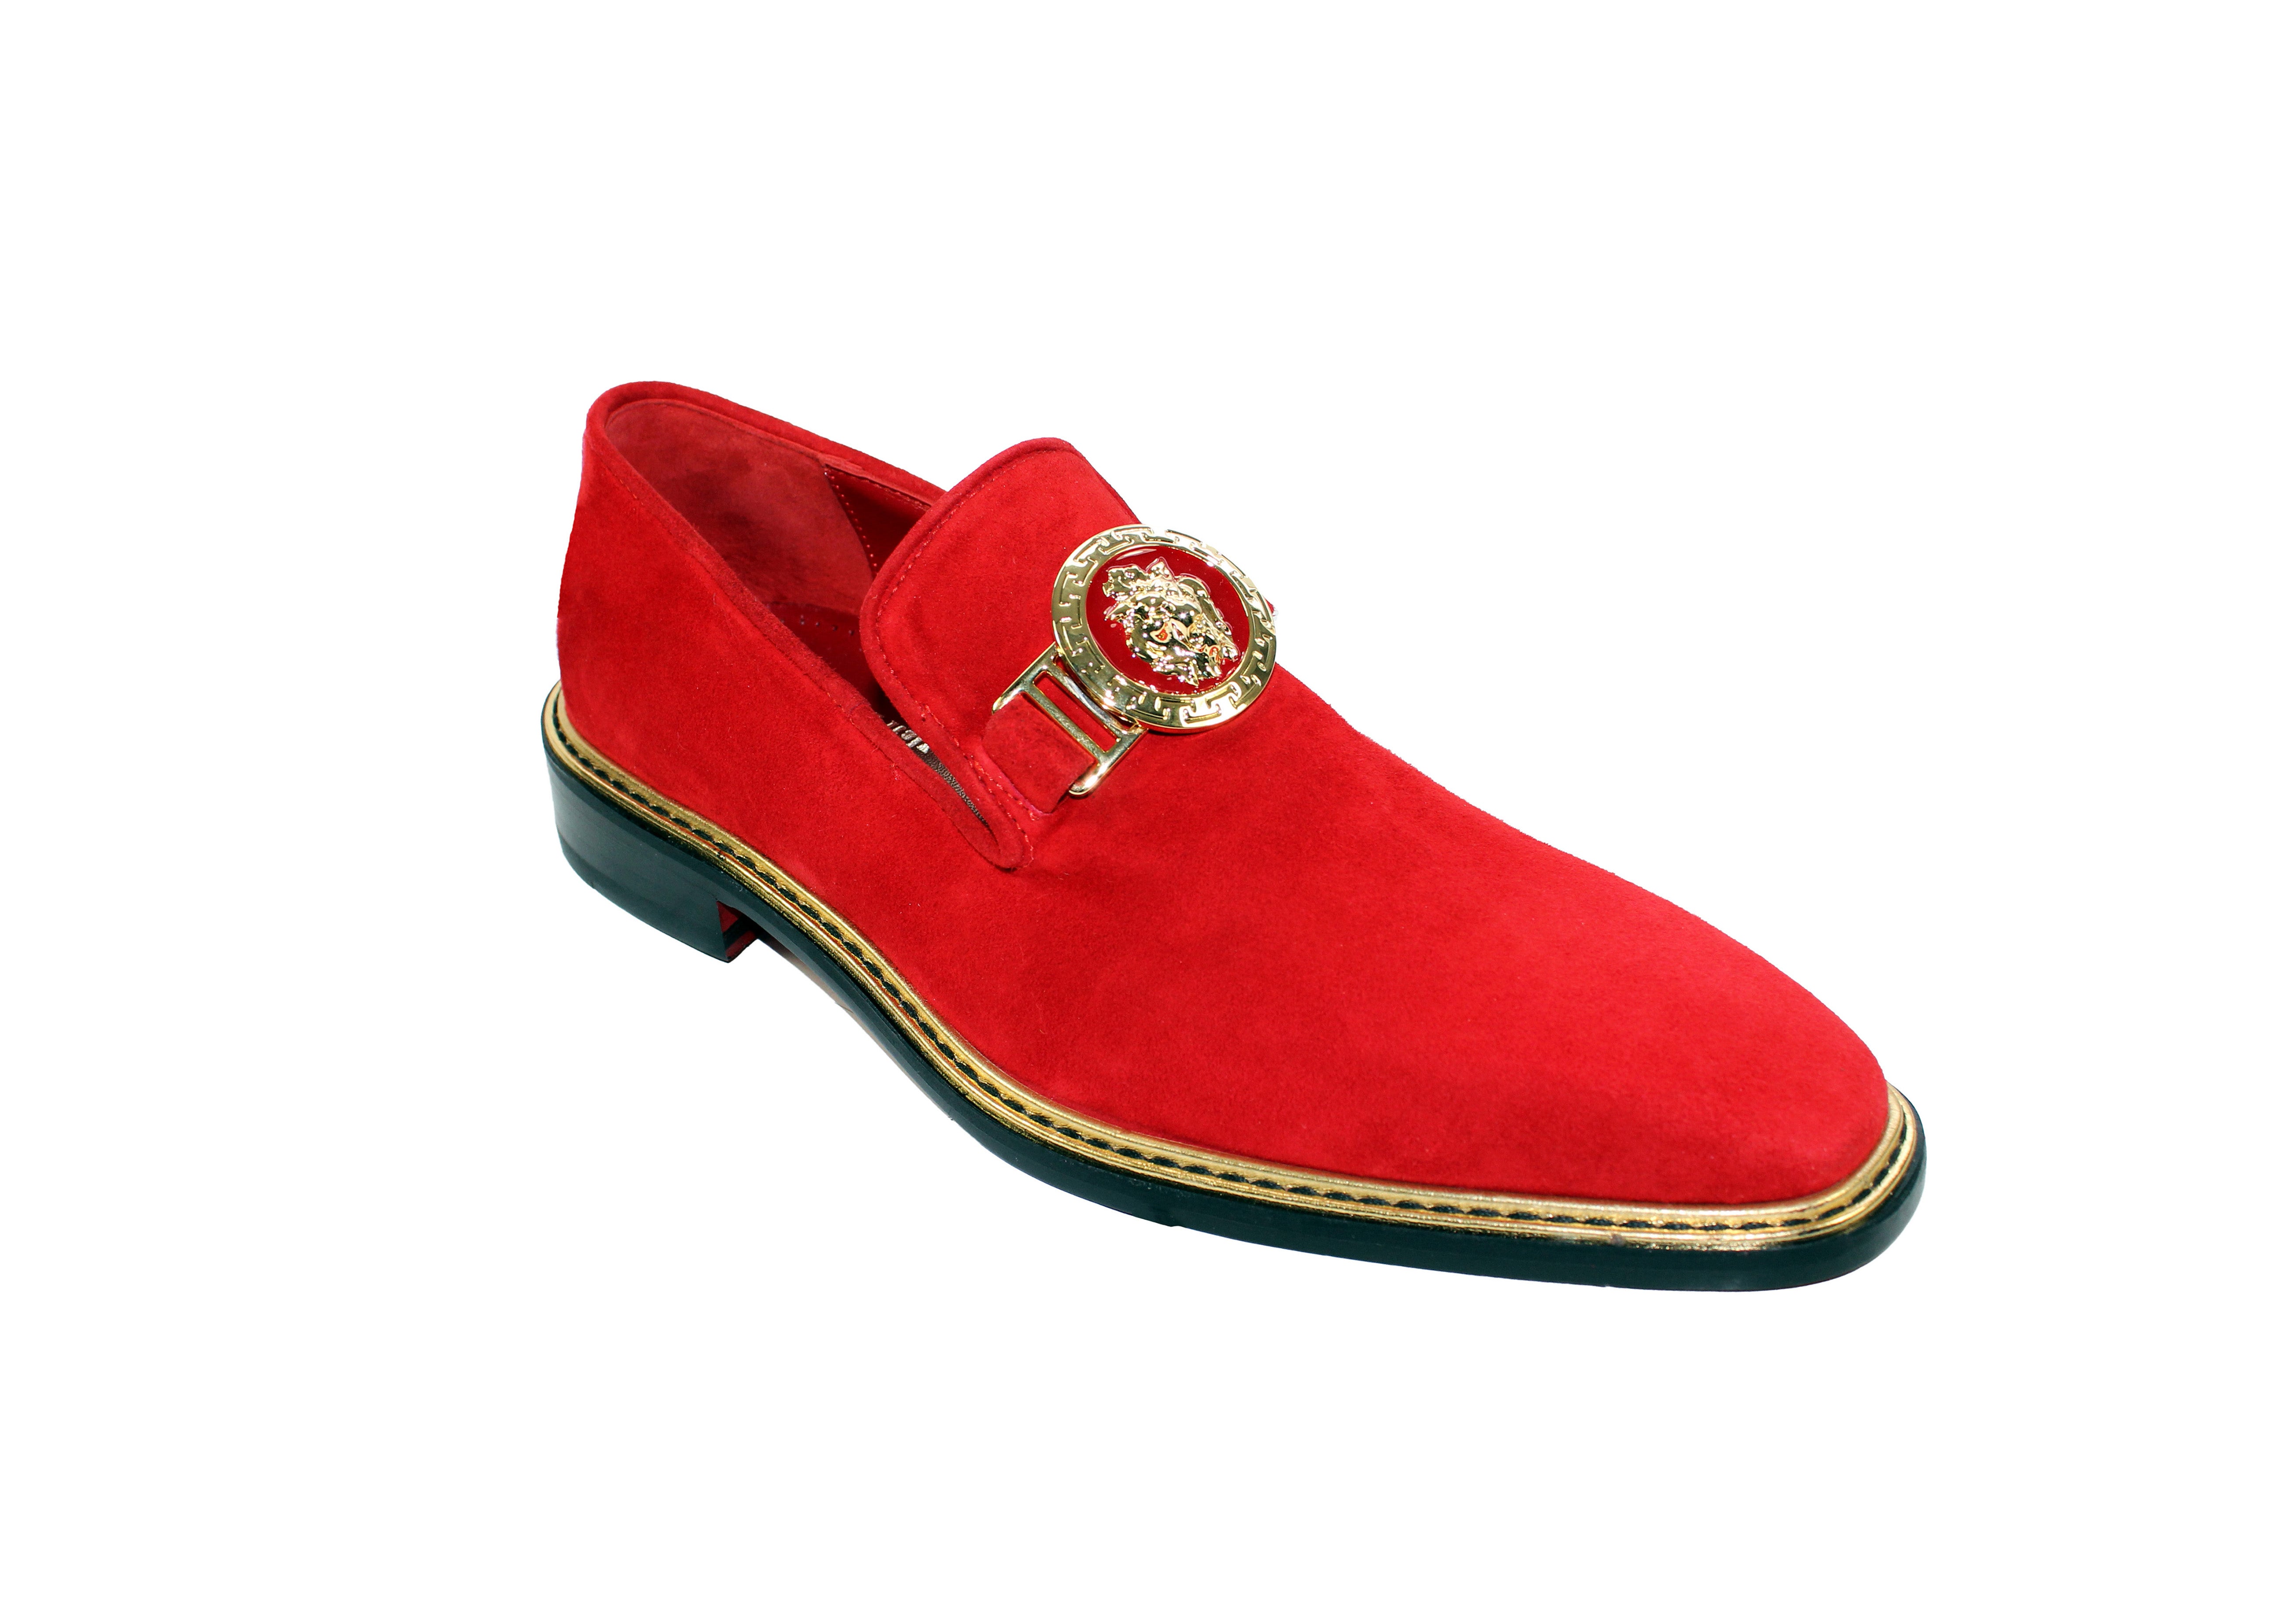 Emilio Franco Couture "EF102" Red Shoes